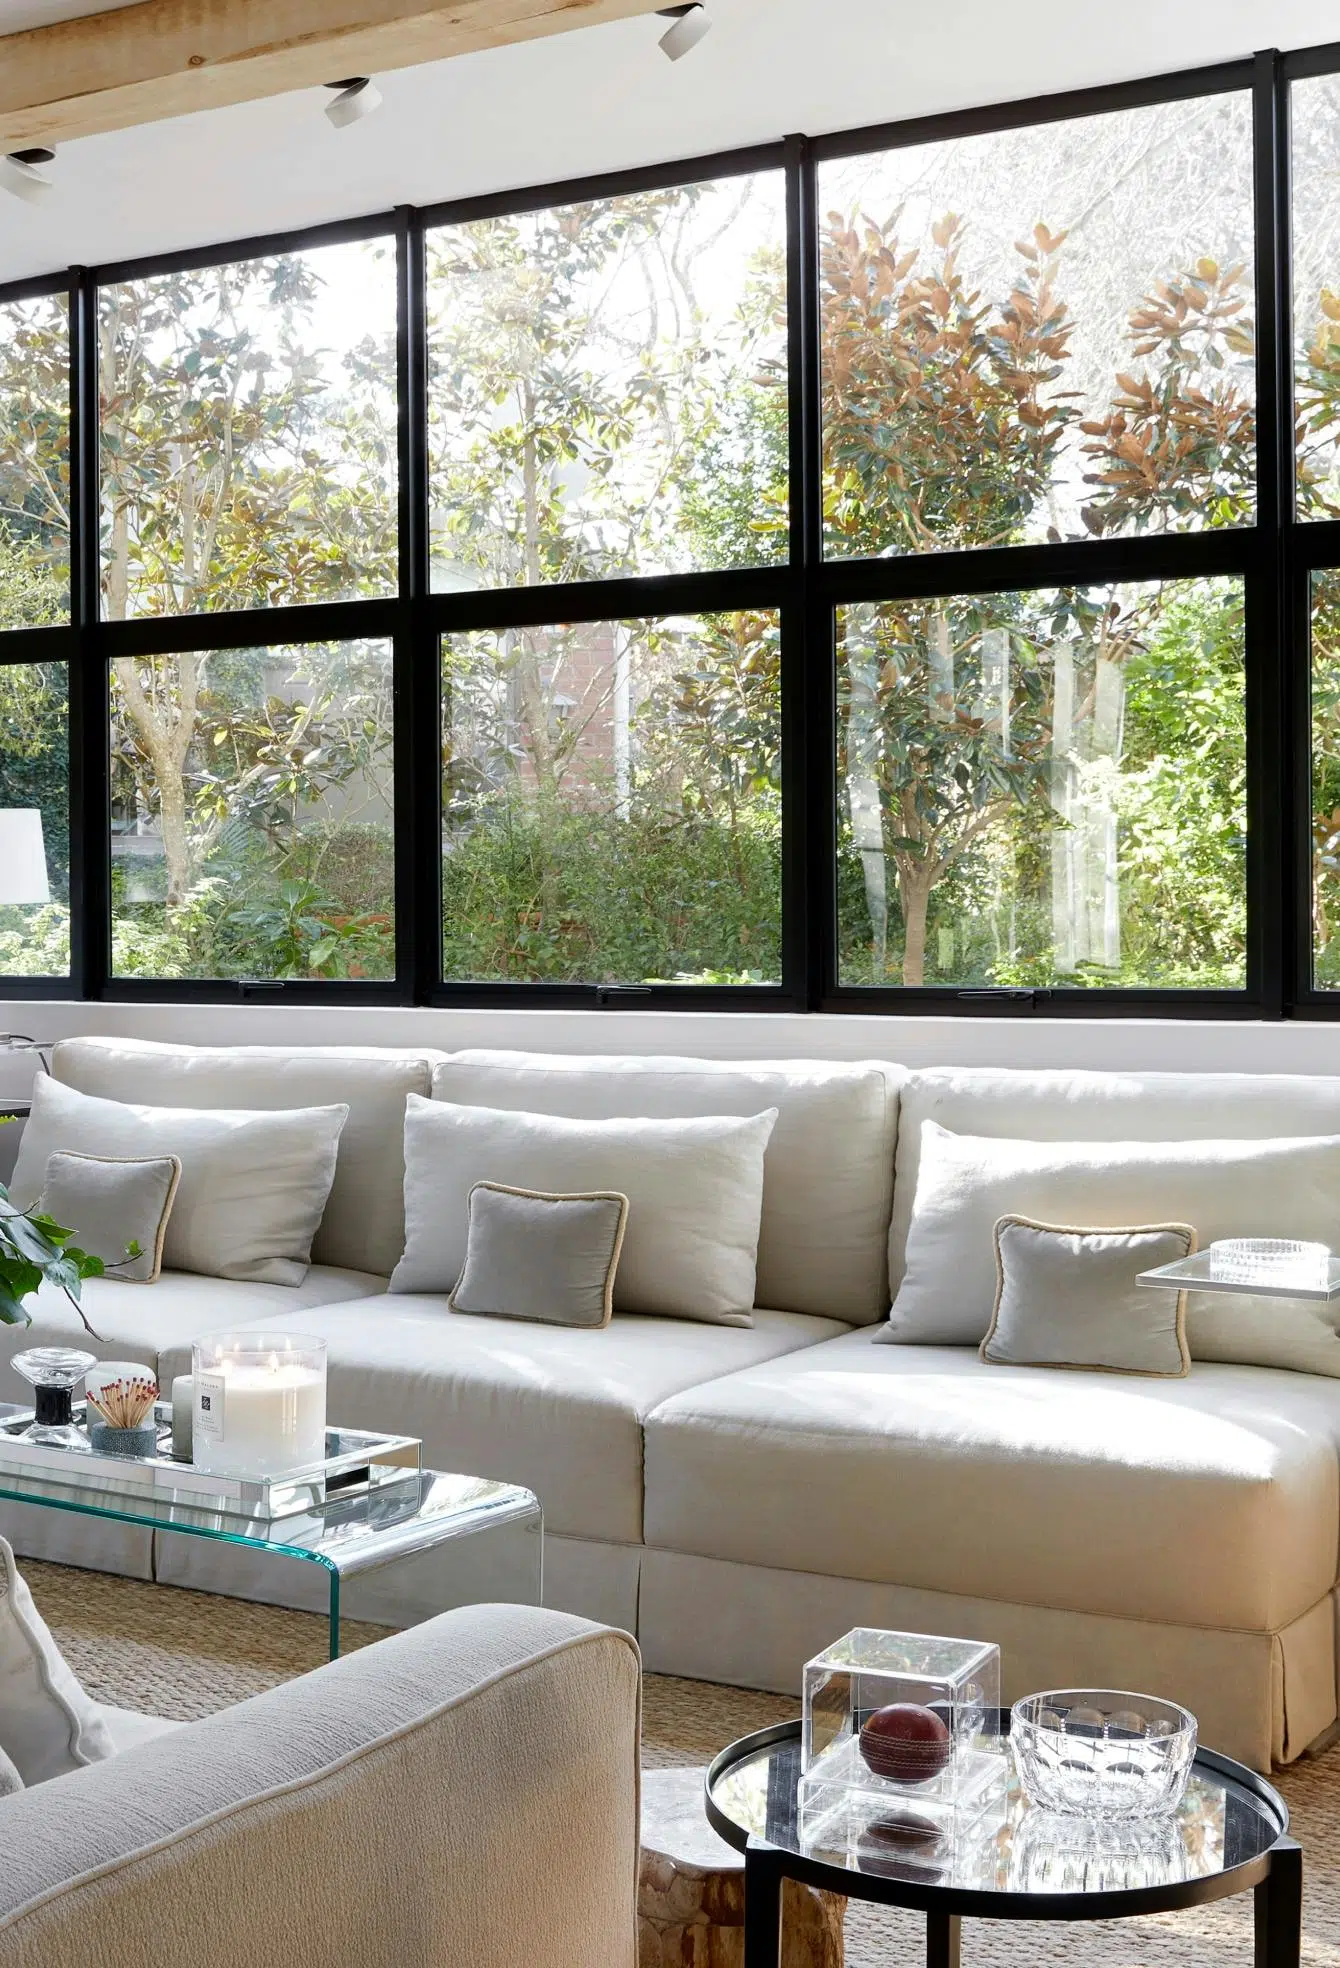 A modern living room with a glass coffee table, a white sofa, and large windows with a view of the greenery outside.